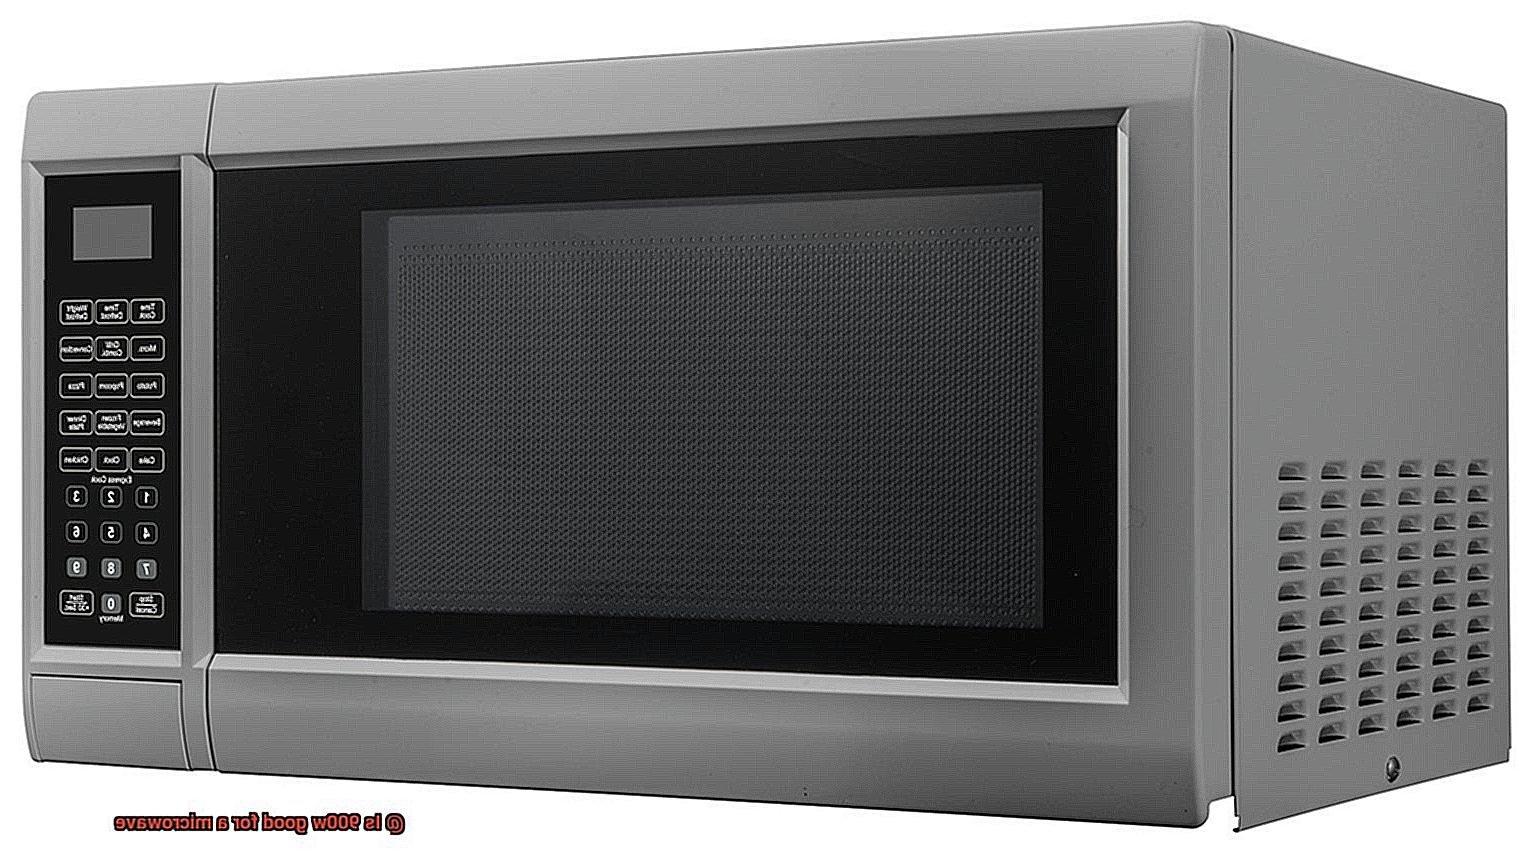 Is 900w good for a microwave-7